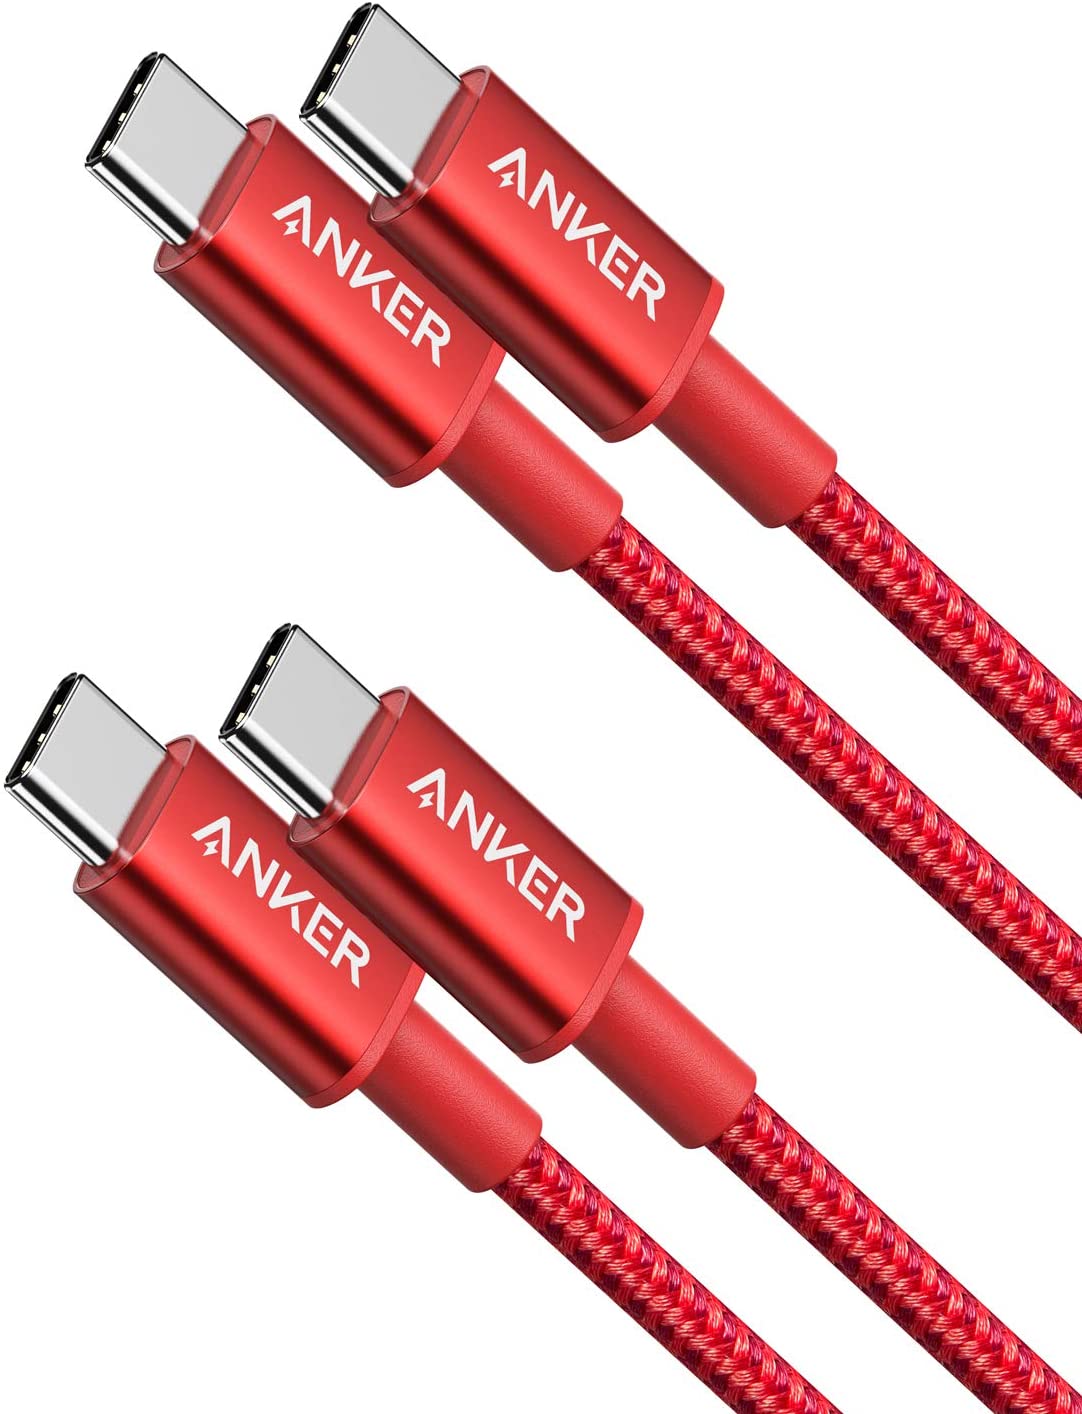 Charger Cable Cable 2 Pack , Usb A To Usb C Charging Cable Usb Type C Fast  Charge Cord Compatible With Samsung Galaxy, Android Cell Phones(6ft)